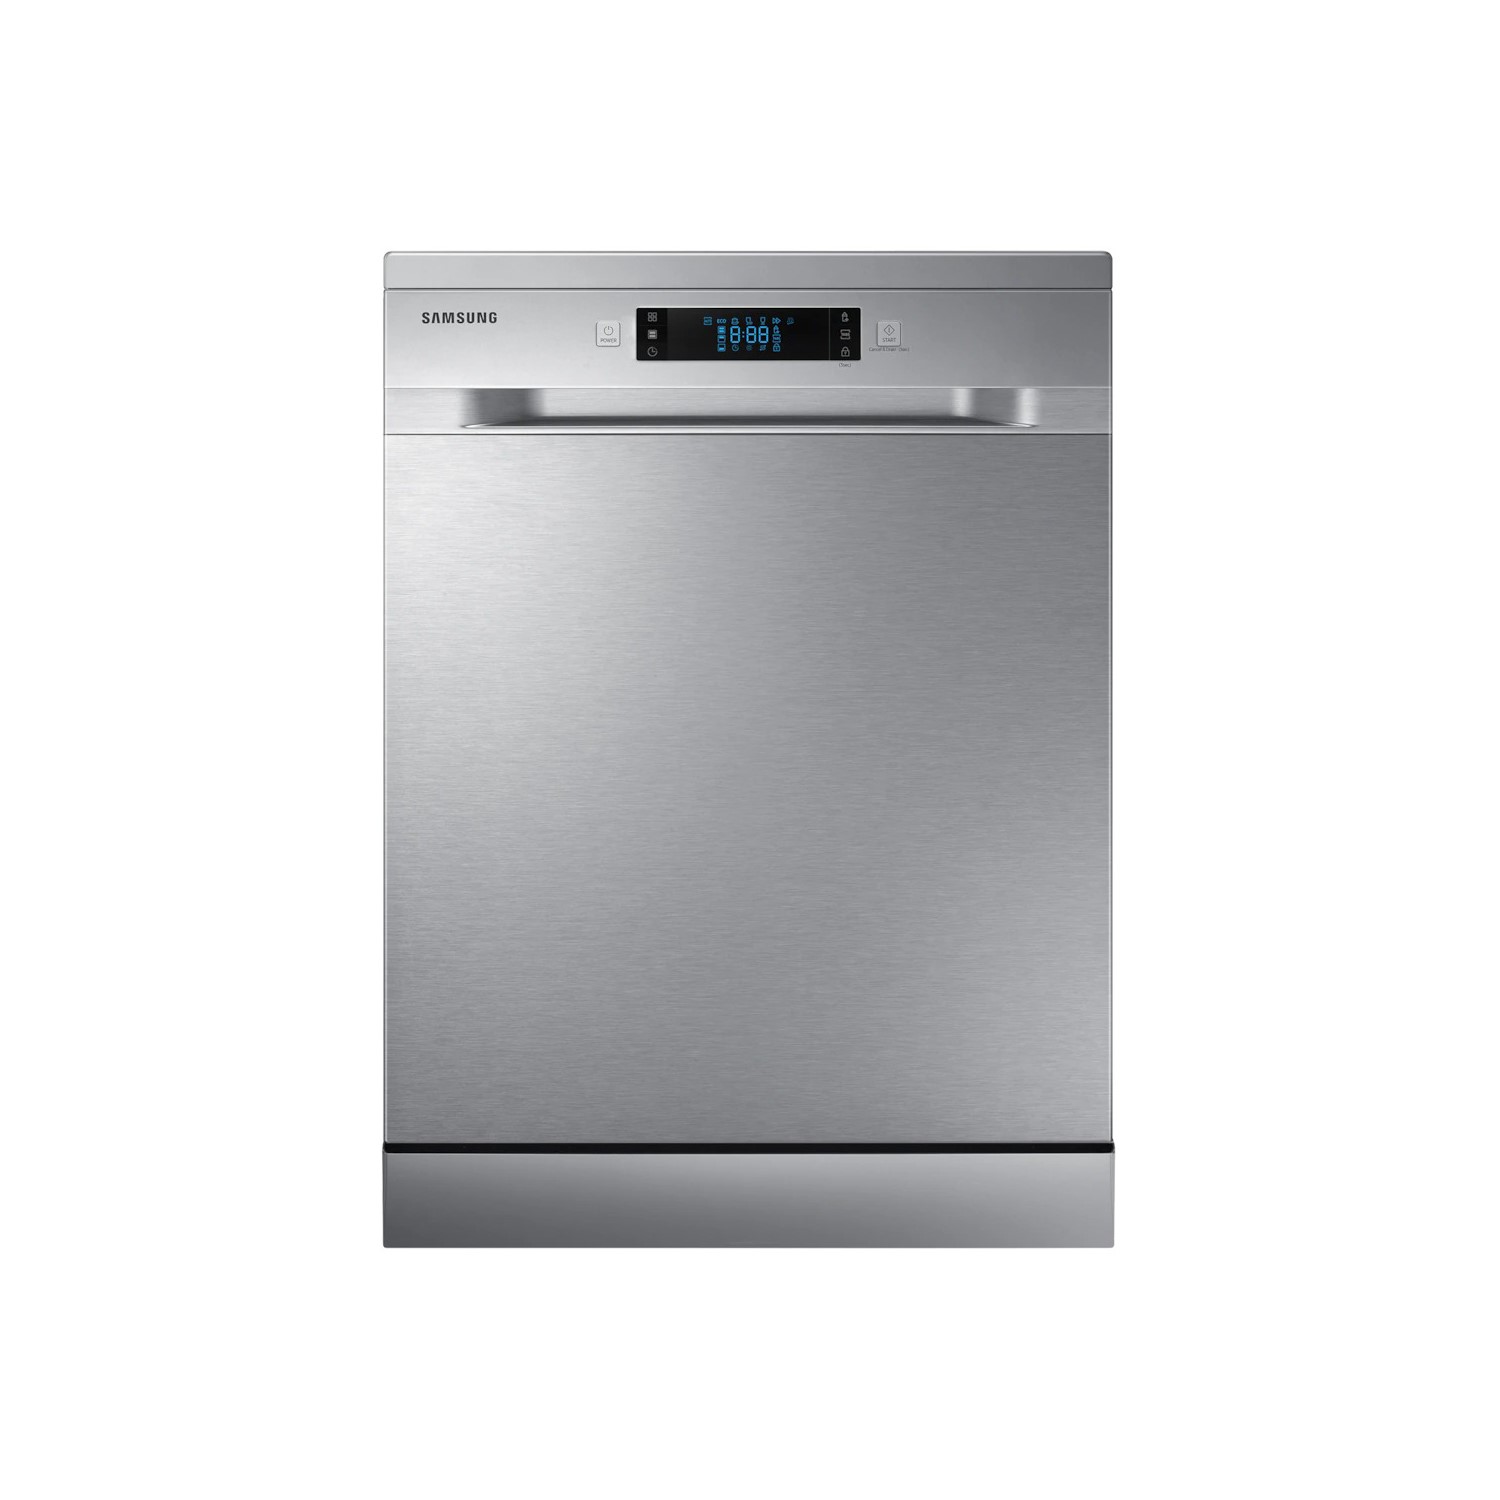 Samsung 14 Place Settings Freestanding Dishwasher - Silver